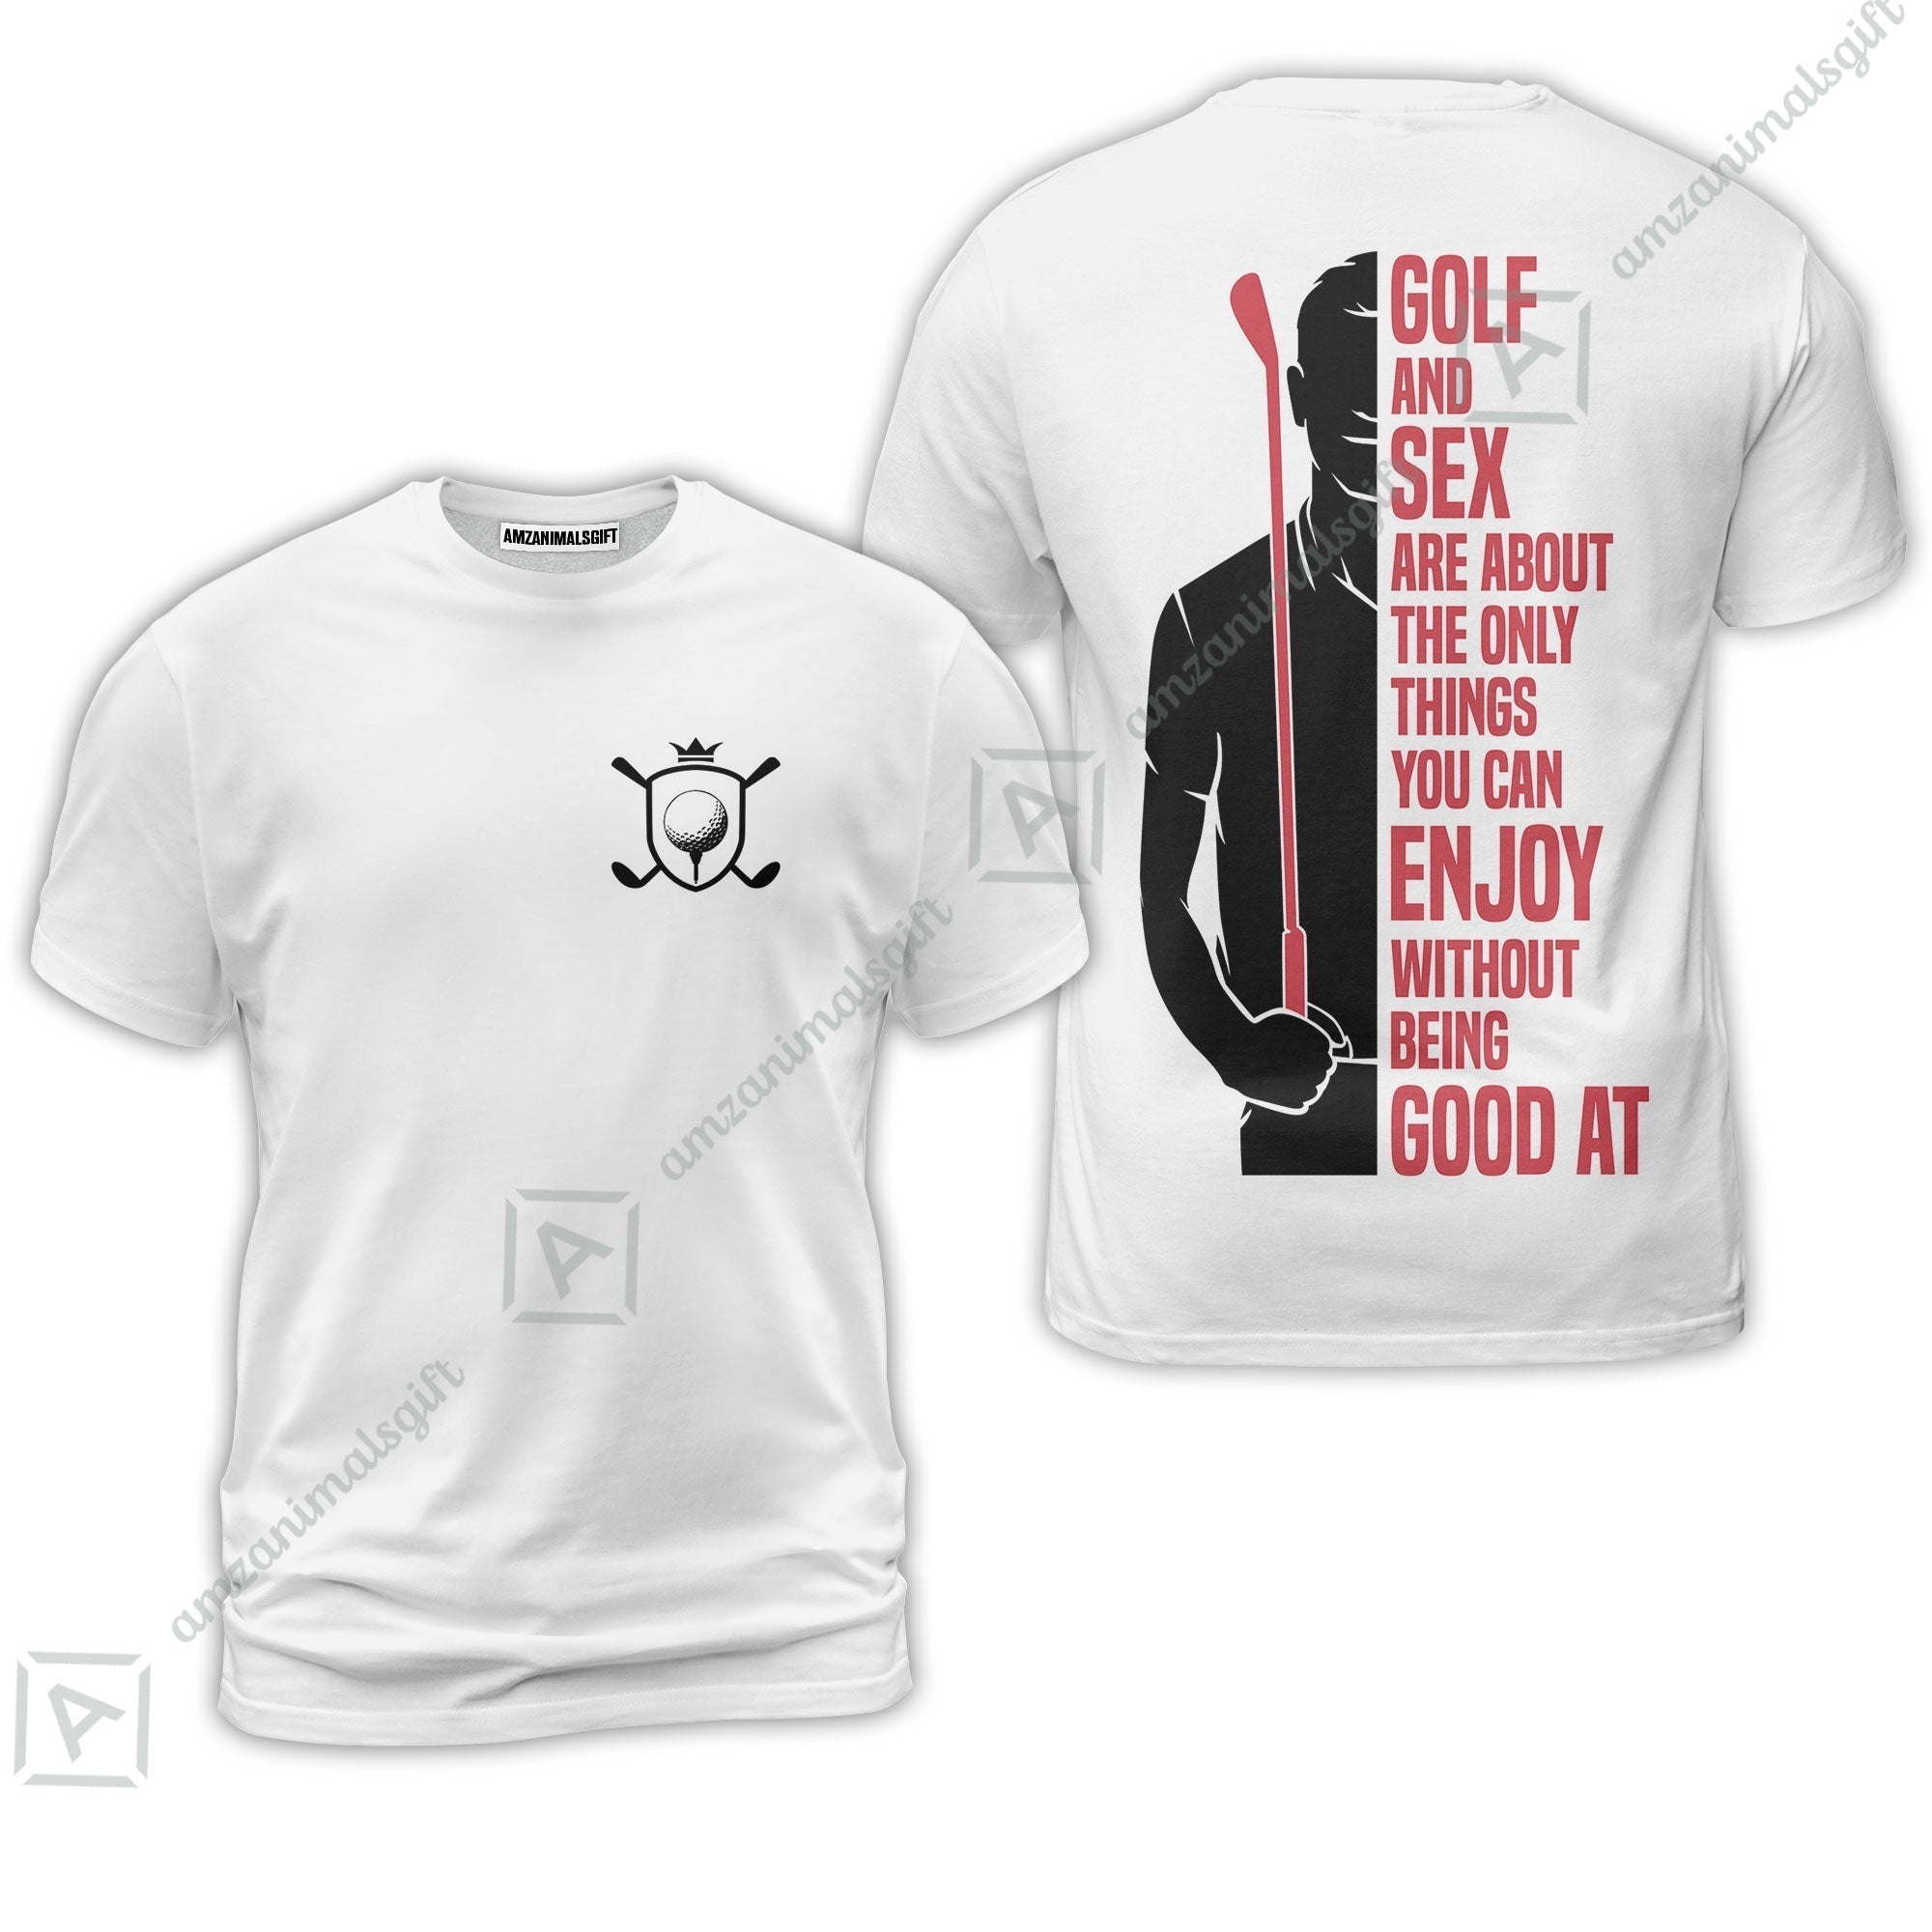 Golf T-Shirt - Golf And Sex Are About The Only Things You Can Enjoy Without Being Good At Polo Shirt,True Golf T-Shirt